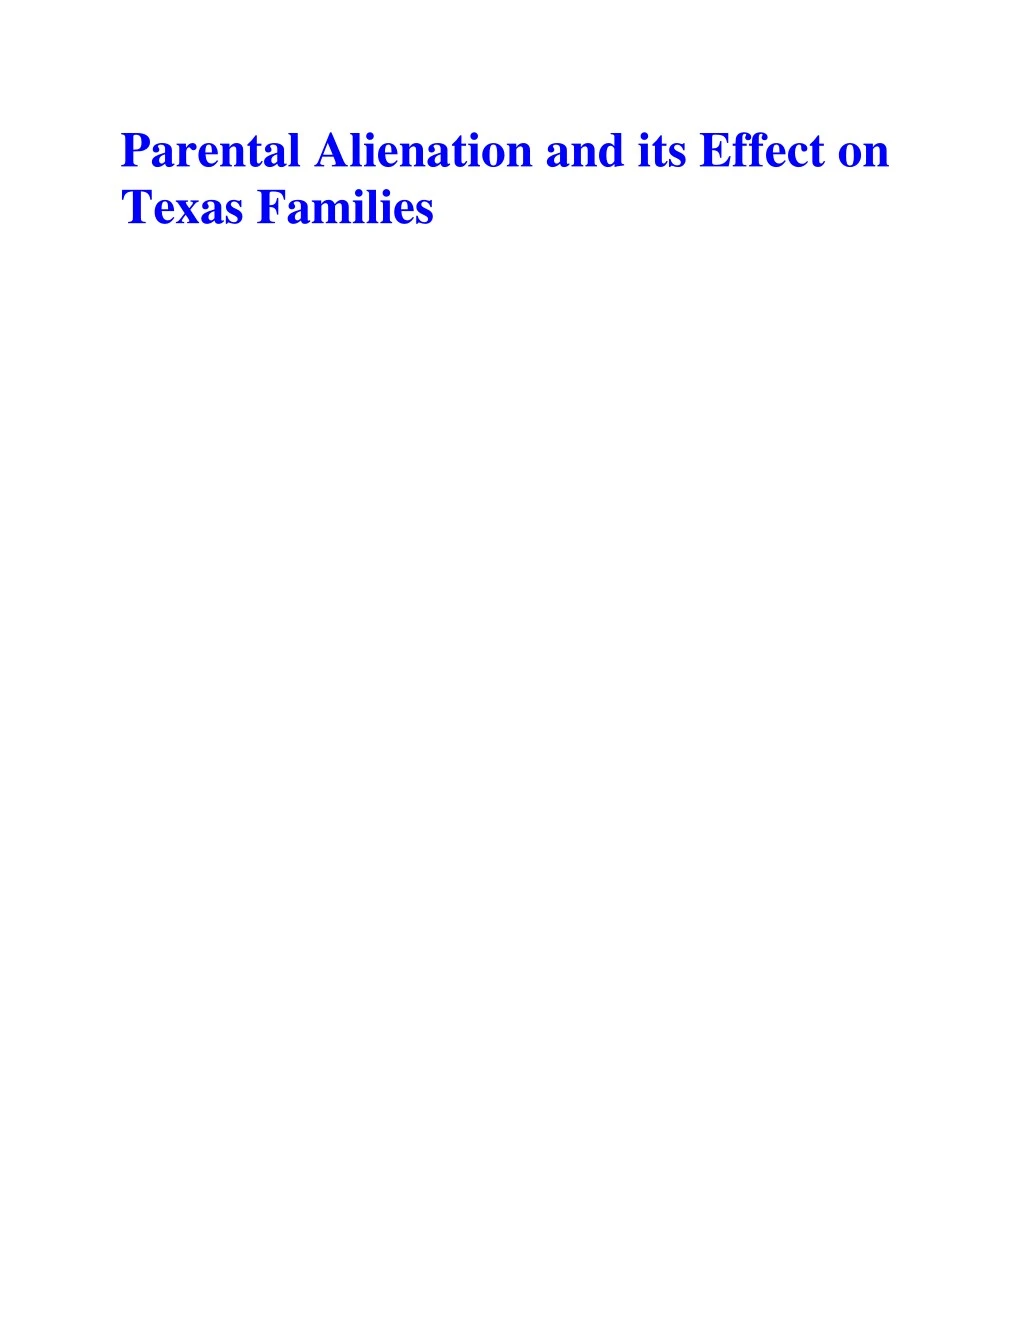 parental alienation and its effect on texas